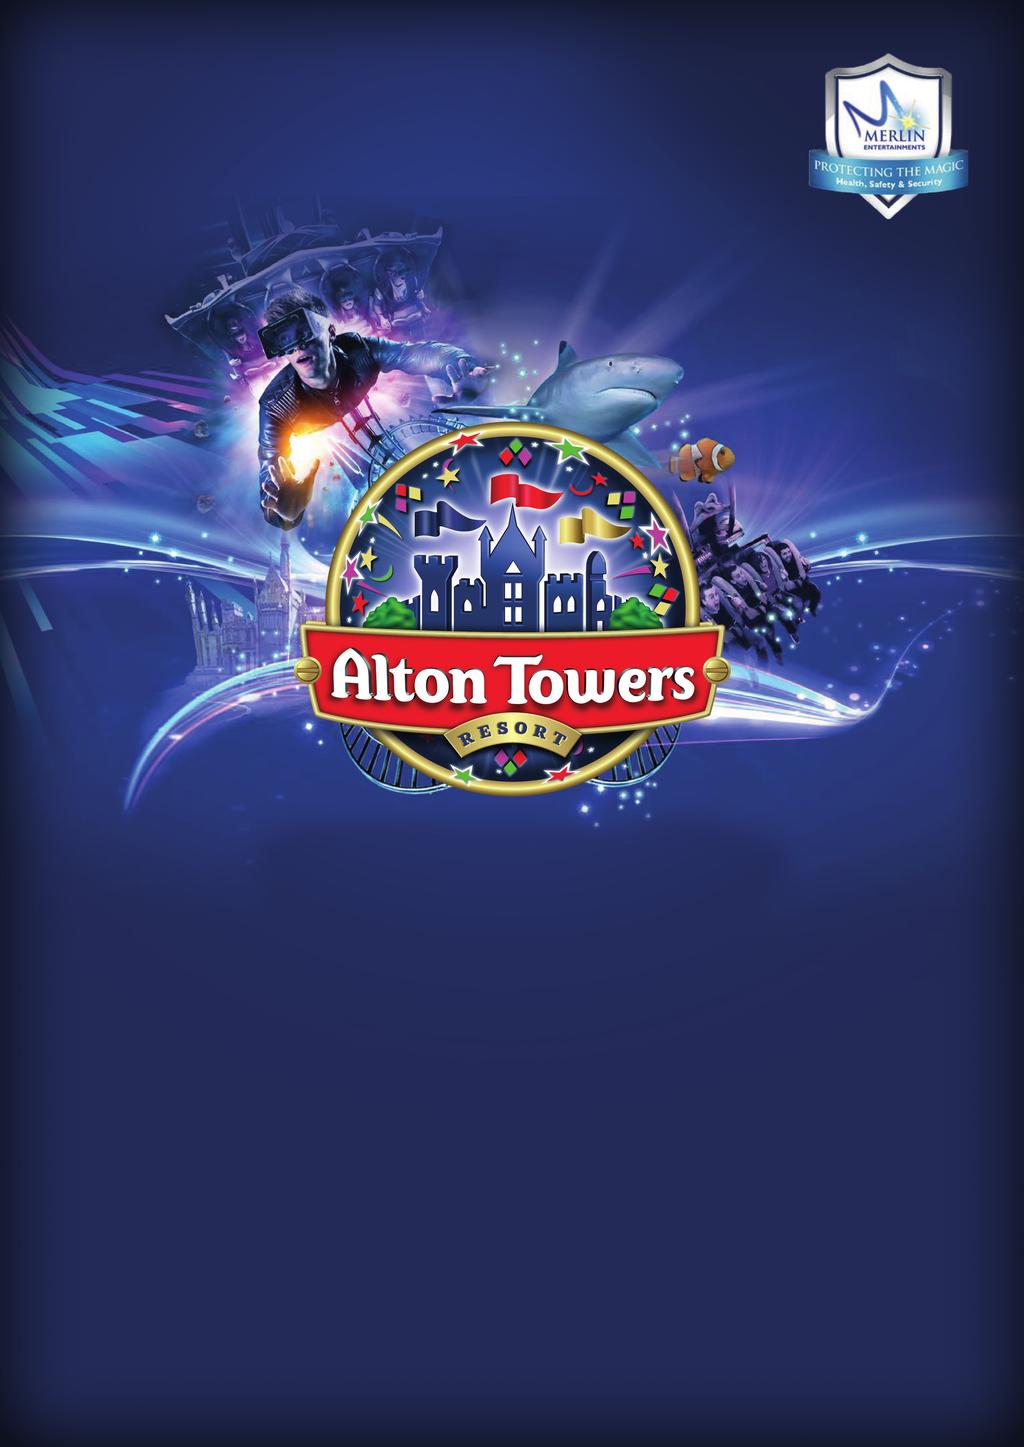 Alton Towers Resort School Planning Pack 2017 We are delighted that you have chosen the Alton Towers Resort for your school trip.